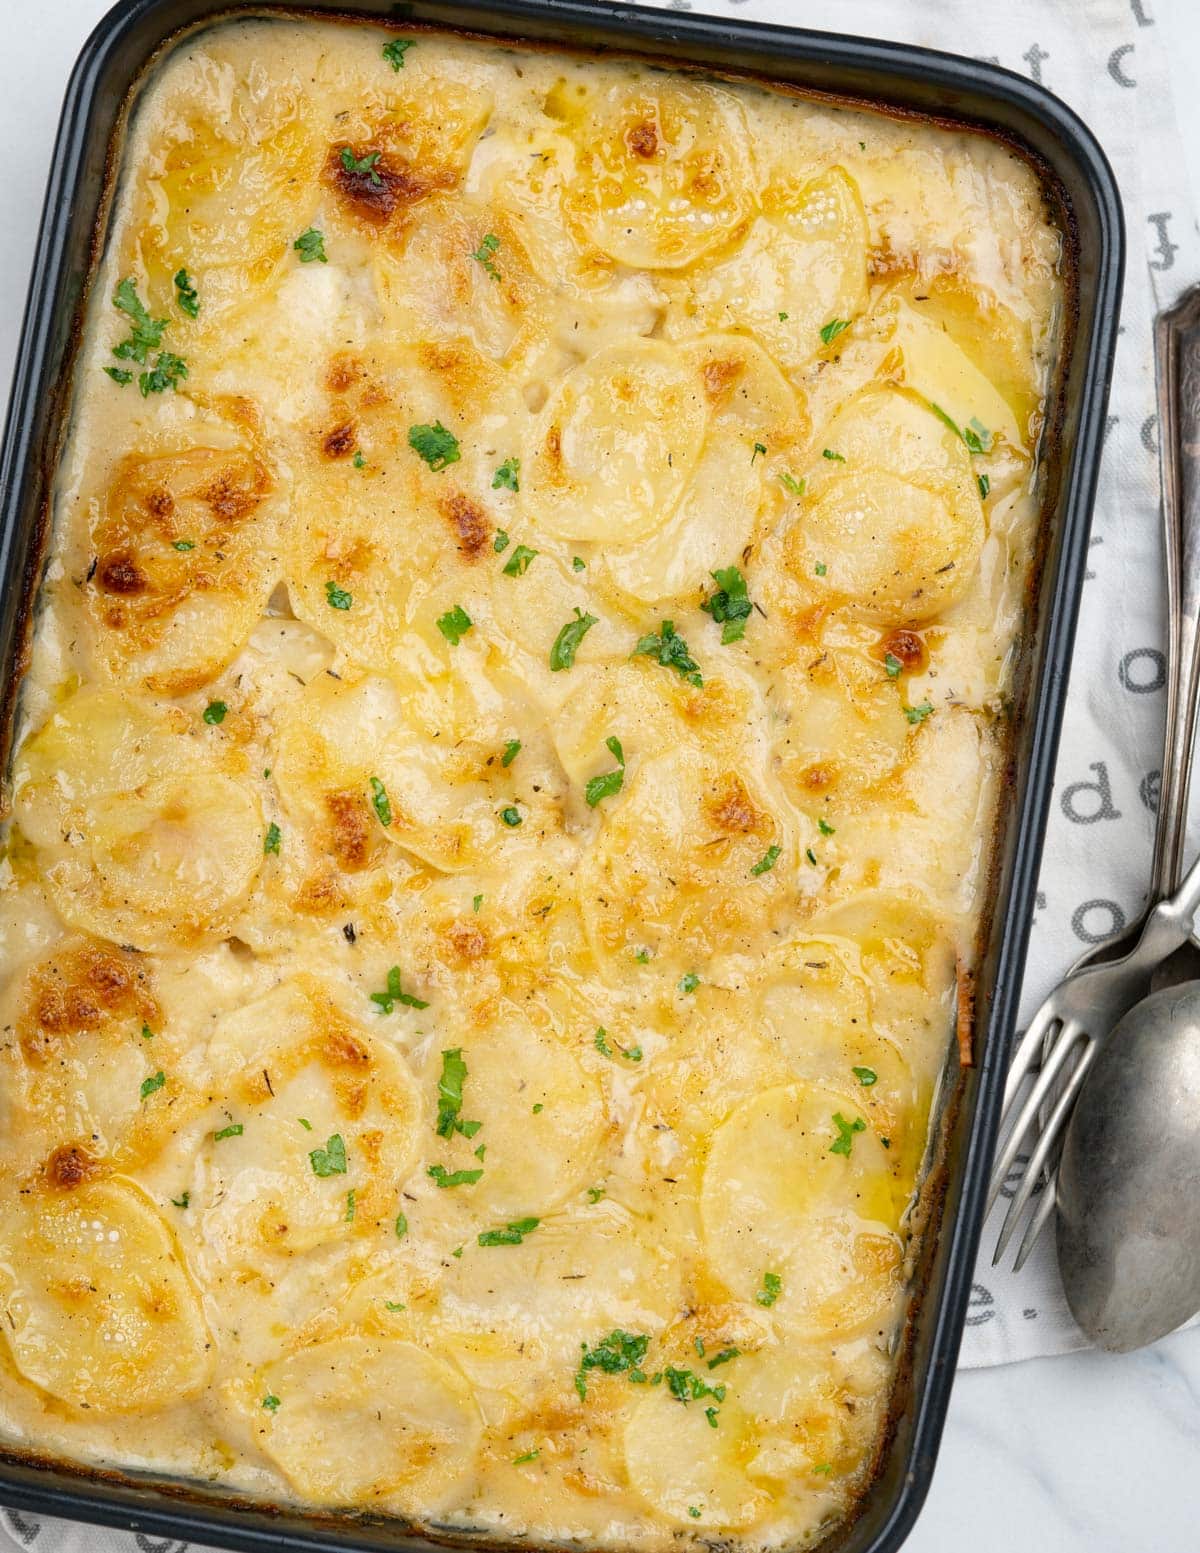 Cheesy sauce and potatoes get a light golden crust on top from baking.It is sprinkled with chopped parsley.